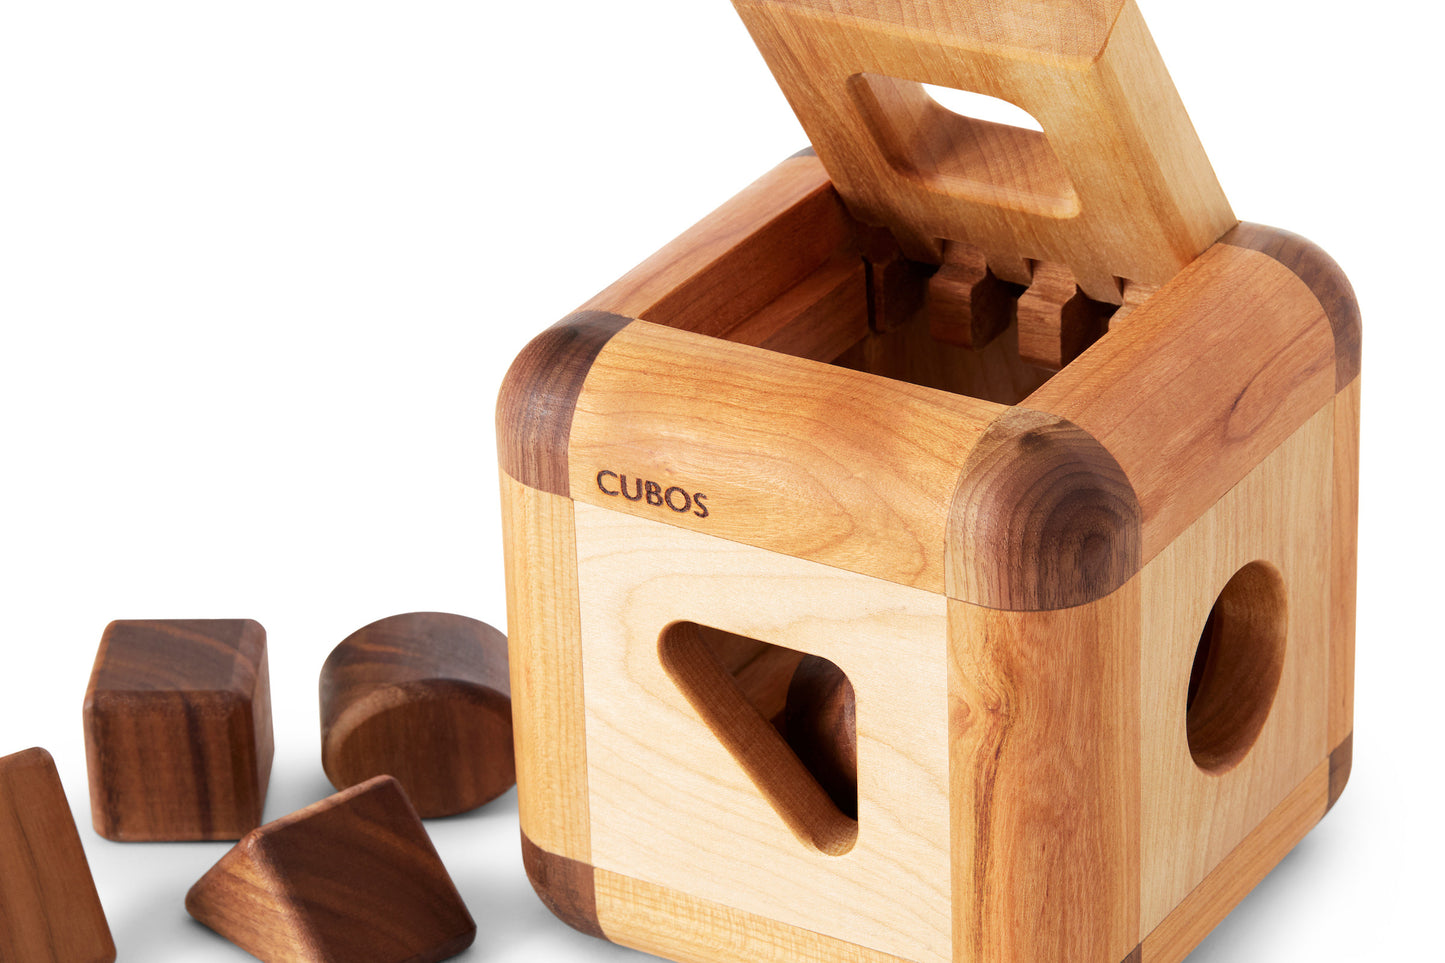 Cubos Lite (Opened) - A wooden shape sorting toy featuring a compact and simplified design, ideal for promoting shape recognition and fine motor skills in Montessori education.